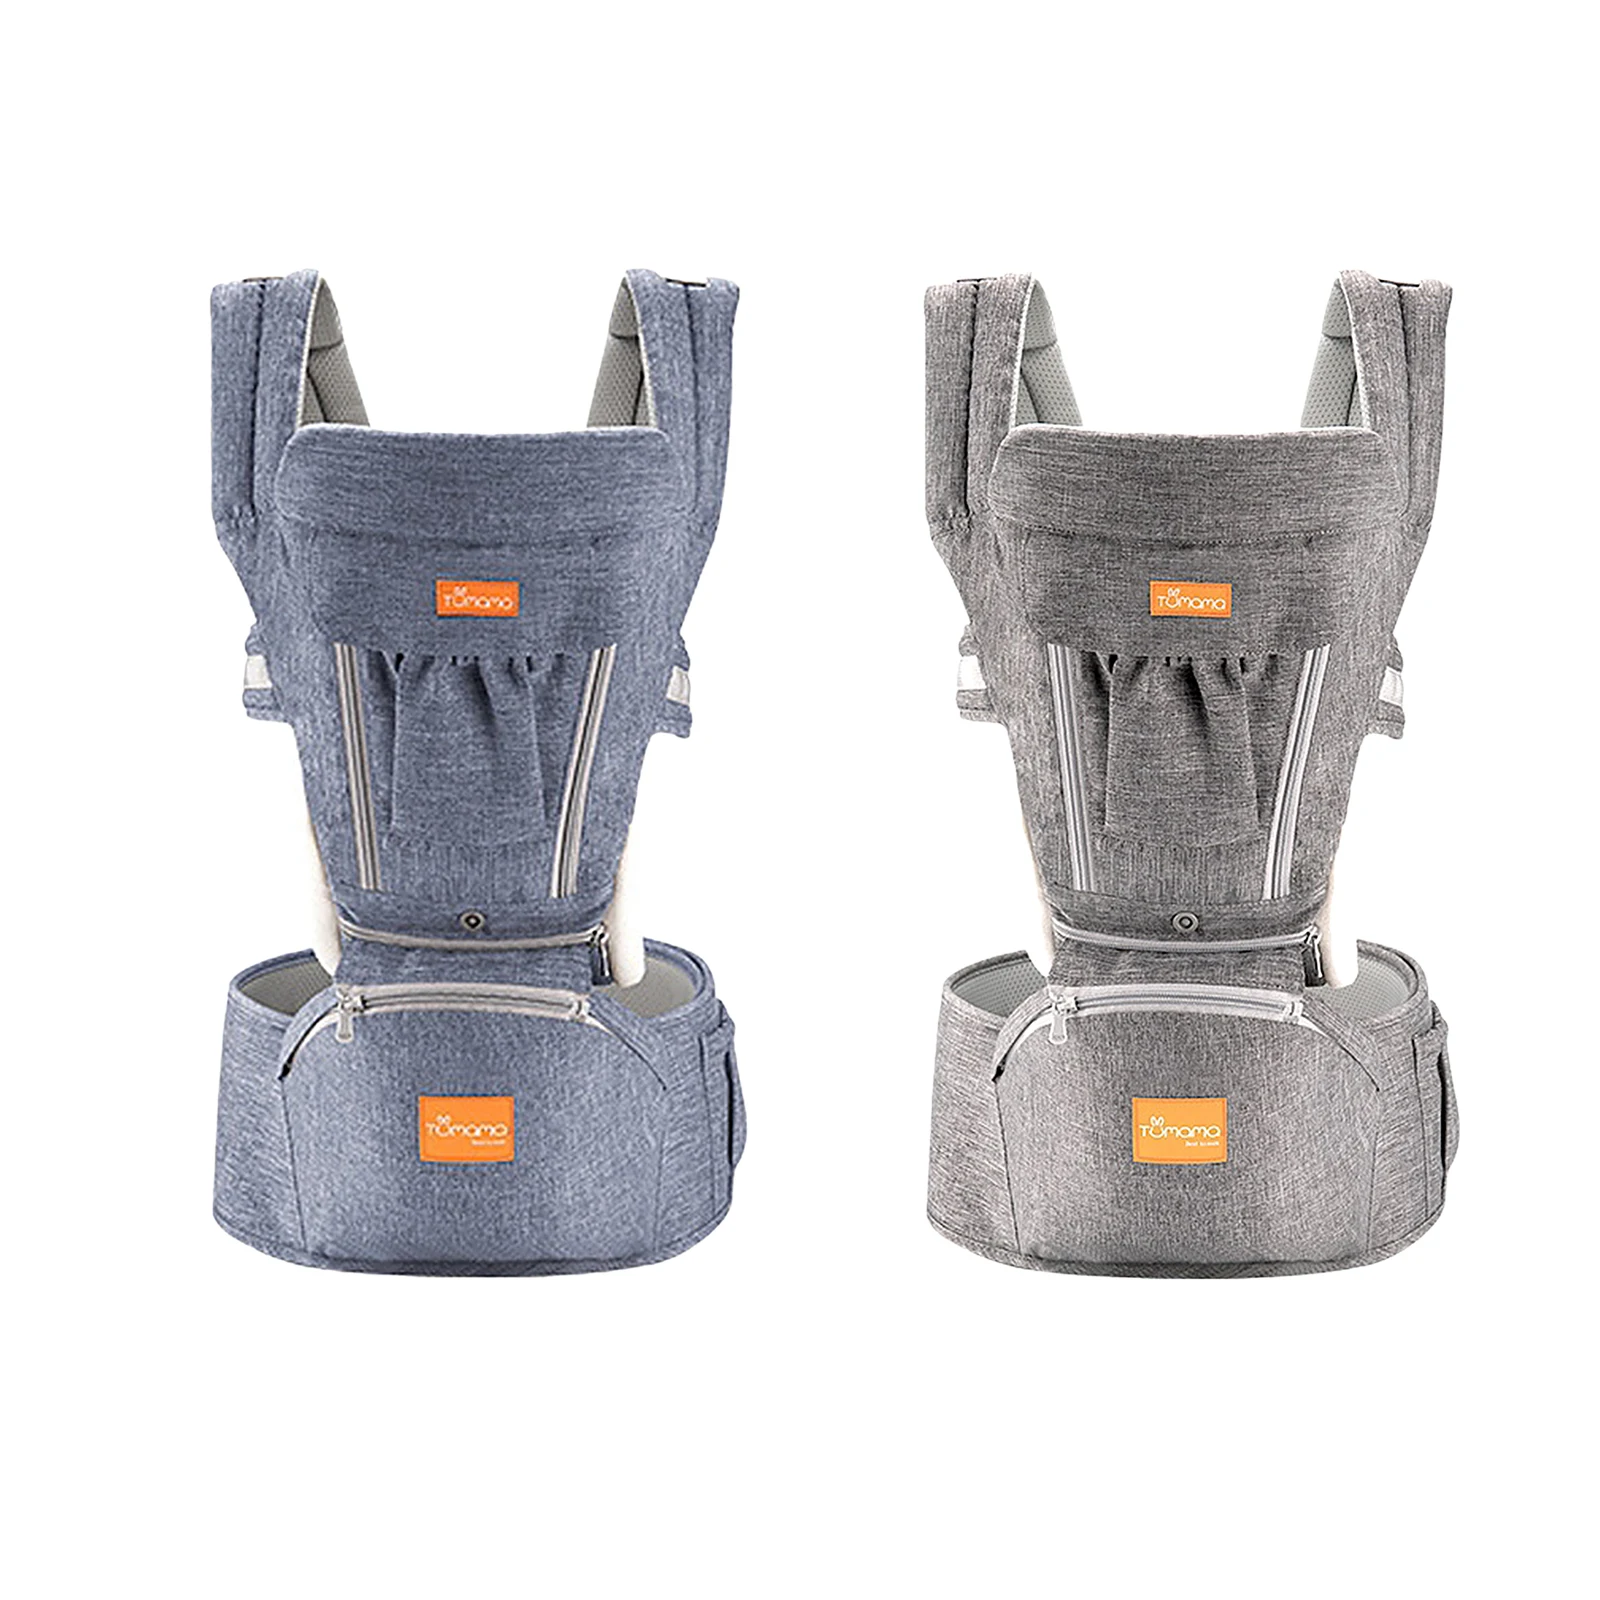 Baby Carrier for Baby Travel Weight-bearing 3.6-15kg 0-36 Months